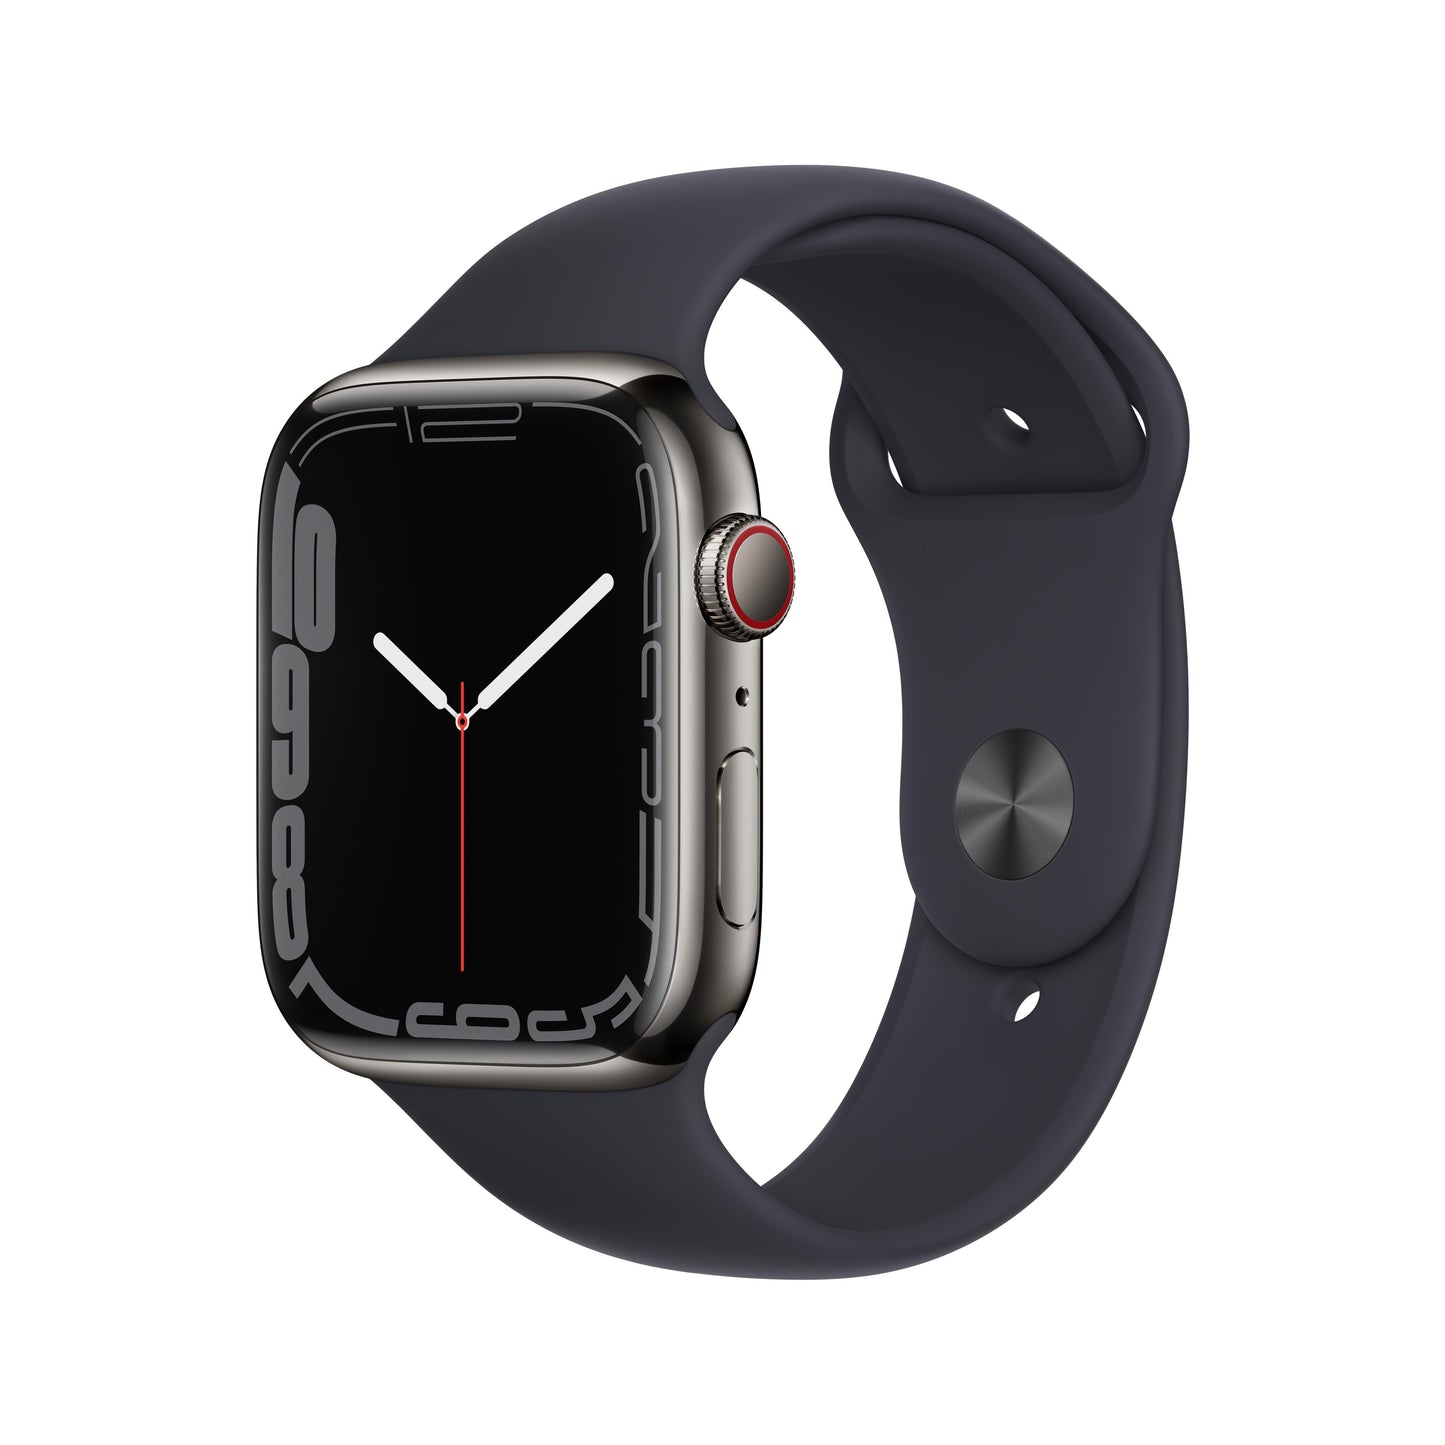 Apple Watch Series 7 GPS + Cellular, 45mm Graphite Stainless Steel